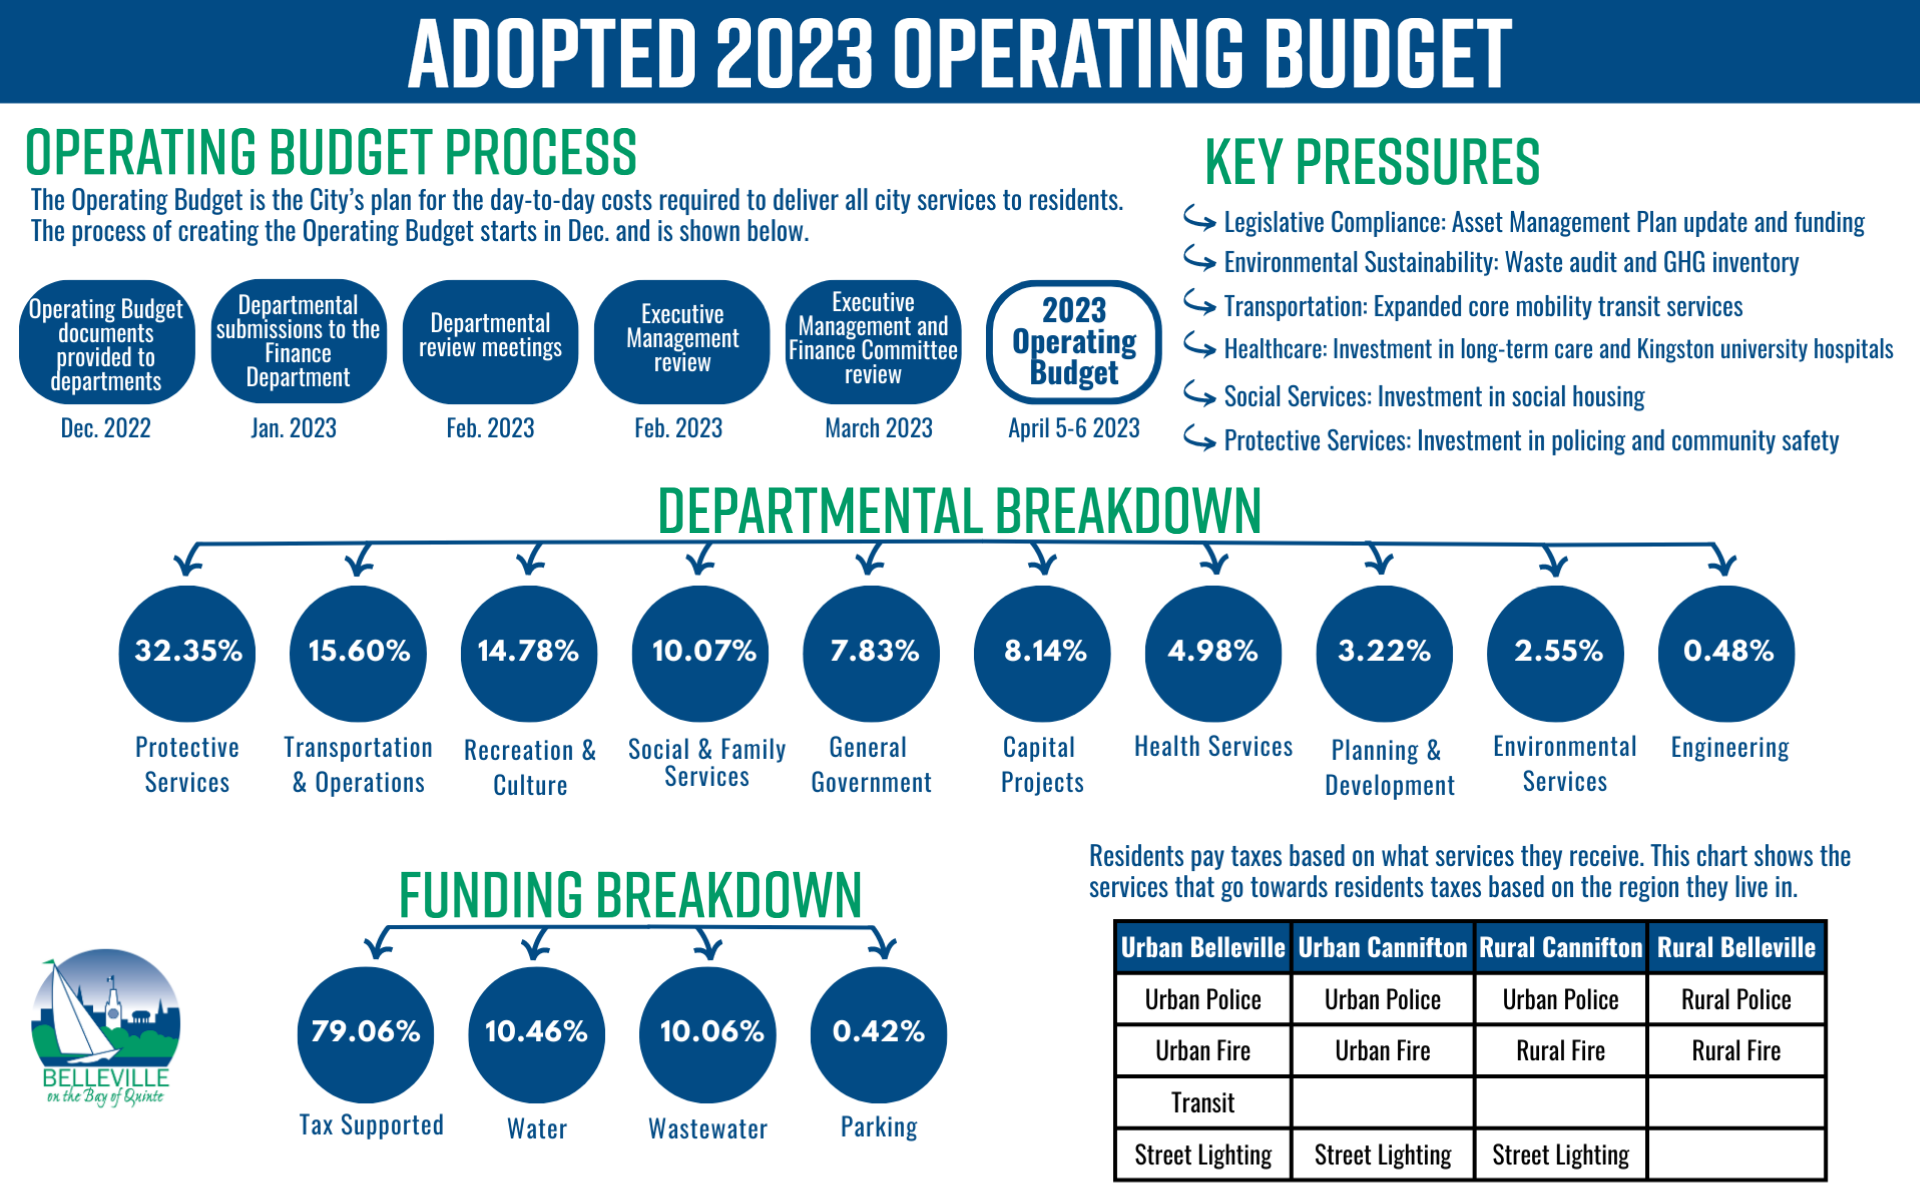 An info graphic of the 2023 adopted Capital Budget for the City of Belleville. The Operating Budget is the City’s plan for the day-to-day costs required to deliver all city services to residents. The process of creating the Operating Budget starts in Dec. and goes through April. Some key pressures include: Legislative Compliance: Asset Management Plan update and funding, Environmental Sustainability: Waste audit and GHG inventory, Healthcare: Investment in long-term care and Kingston university hospitals, Transportation: Expanded core mobility transit services, Social Services: Investment in social housing, and Protective Services: Investment in policing and community safety. 